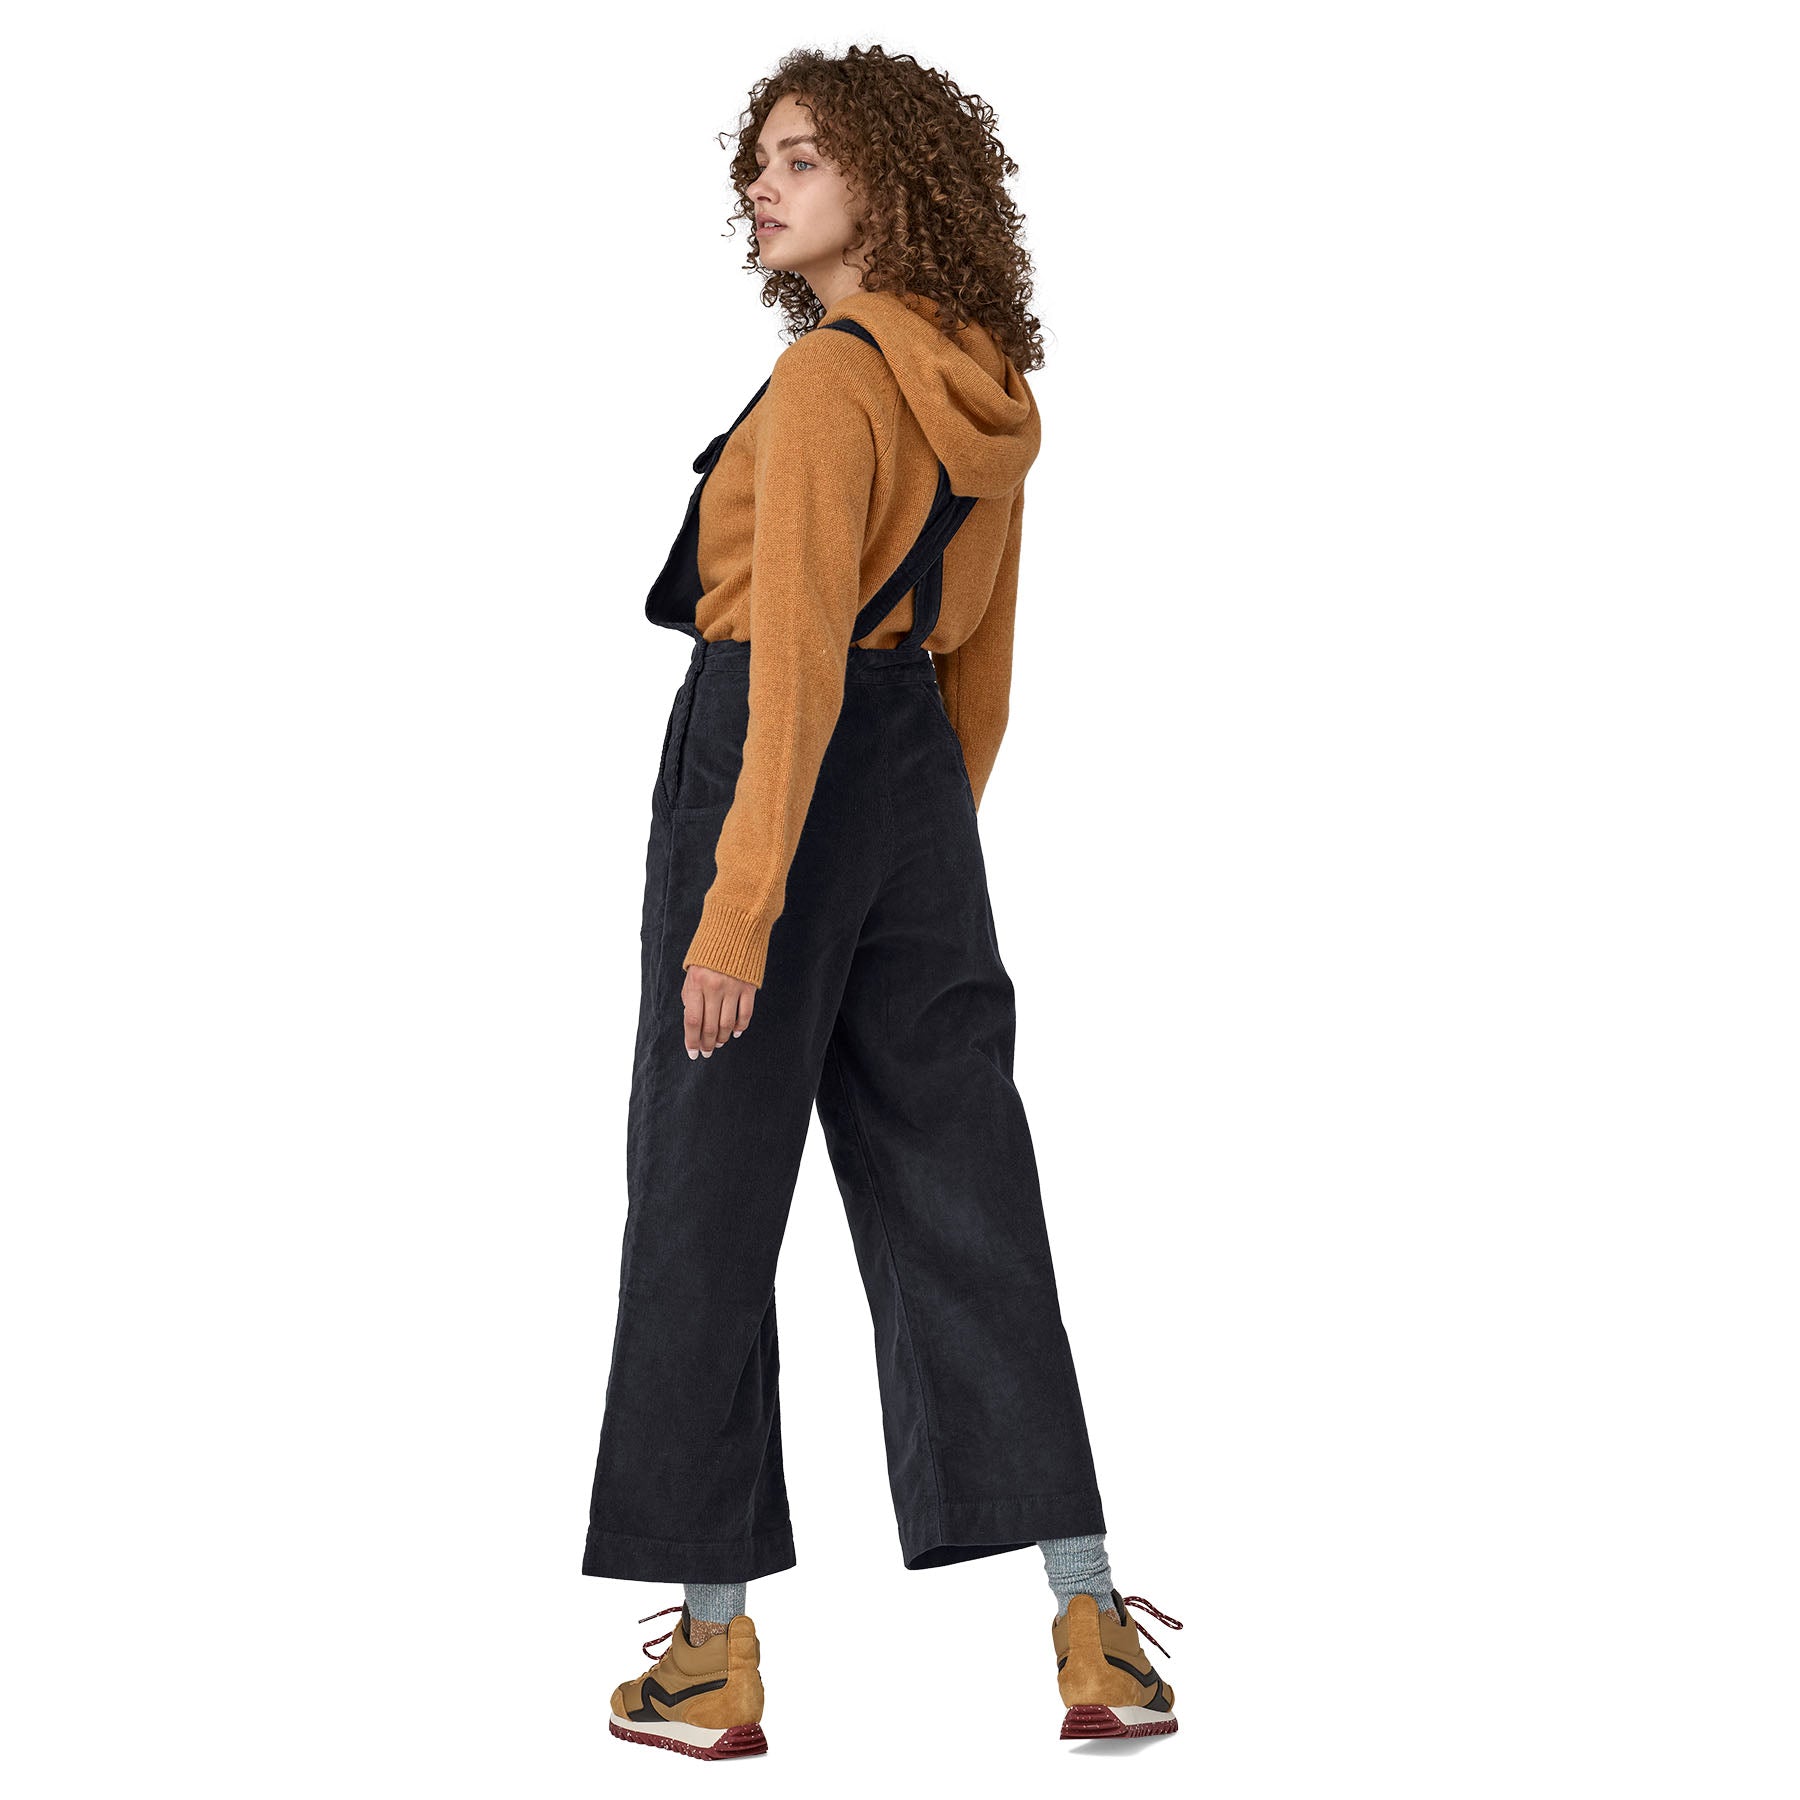 patagonia stand up cropped pantsPatagonia Stand Up Cropped Pants